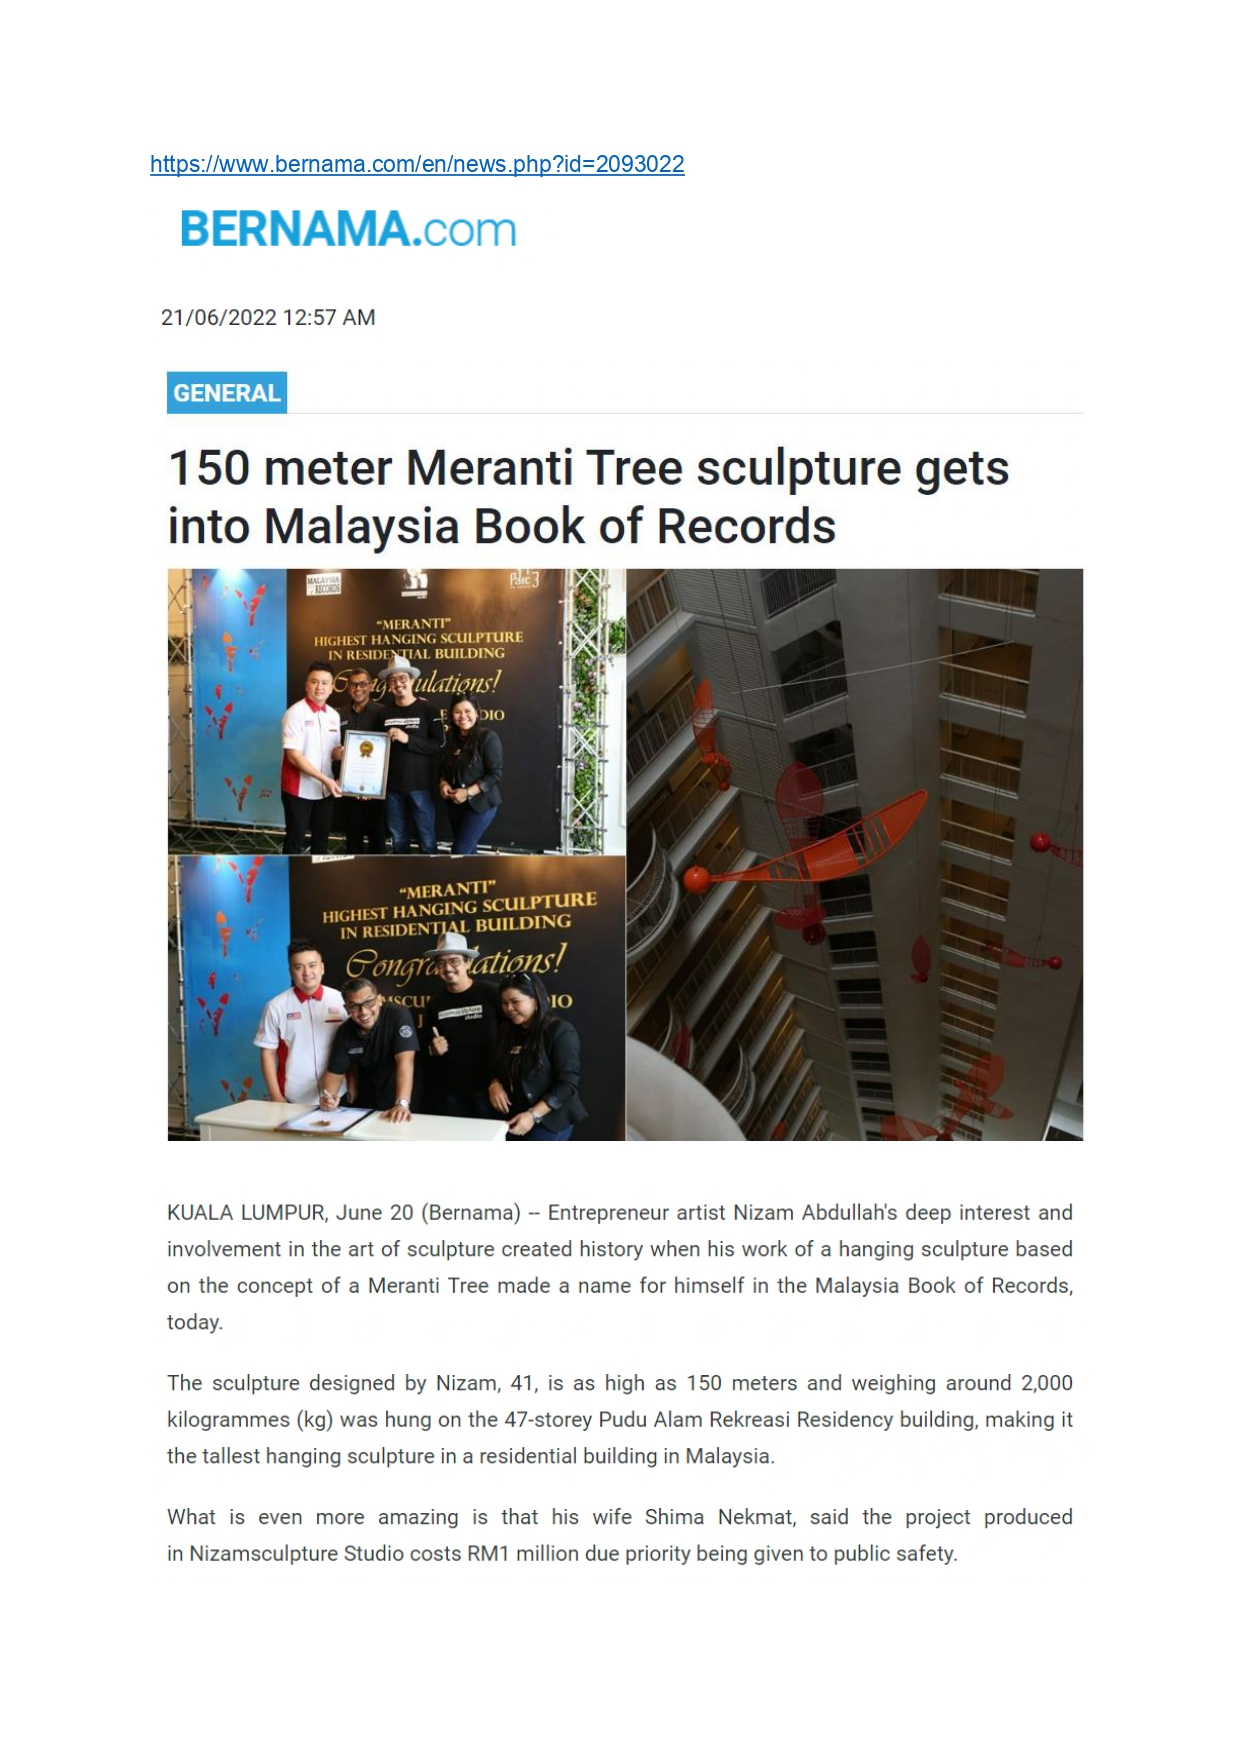 Bernama and NST : Parc3's Meranti Sculpture gets into the Malaysia Book of Records